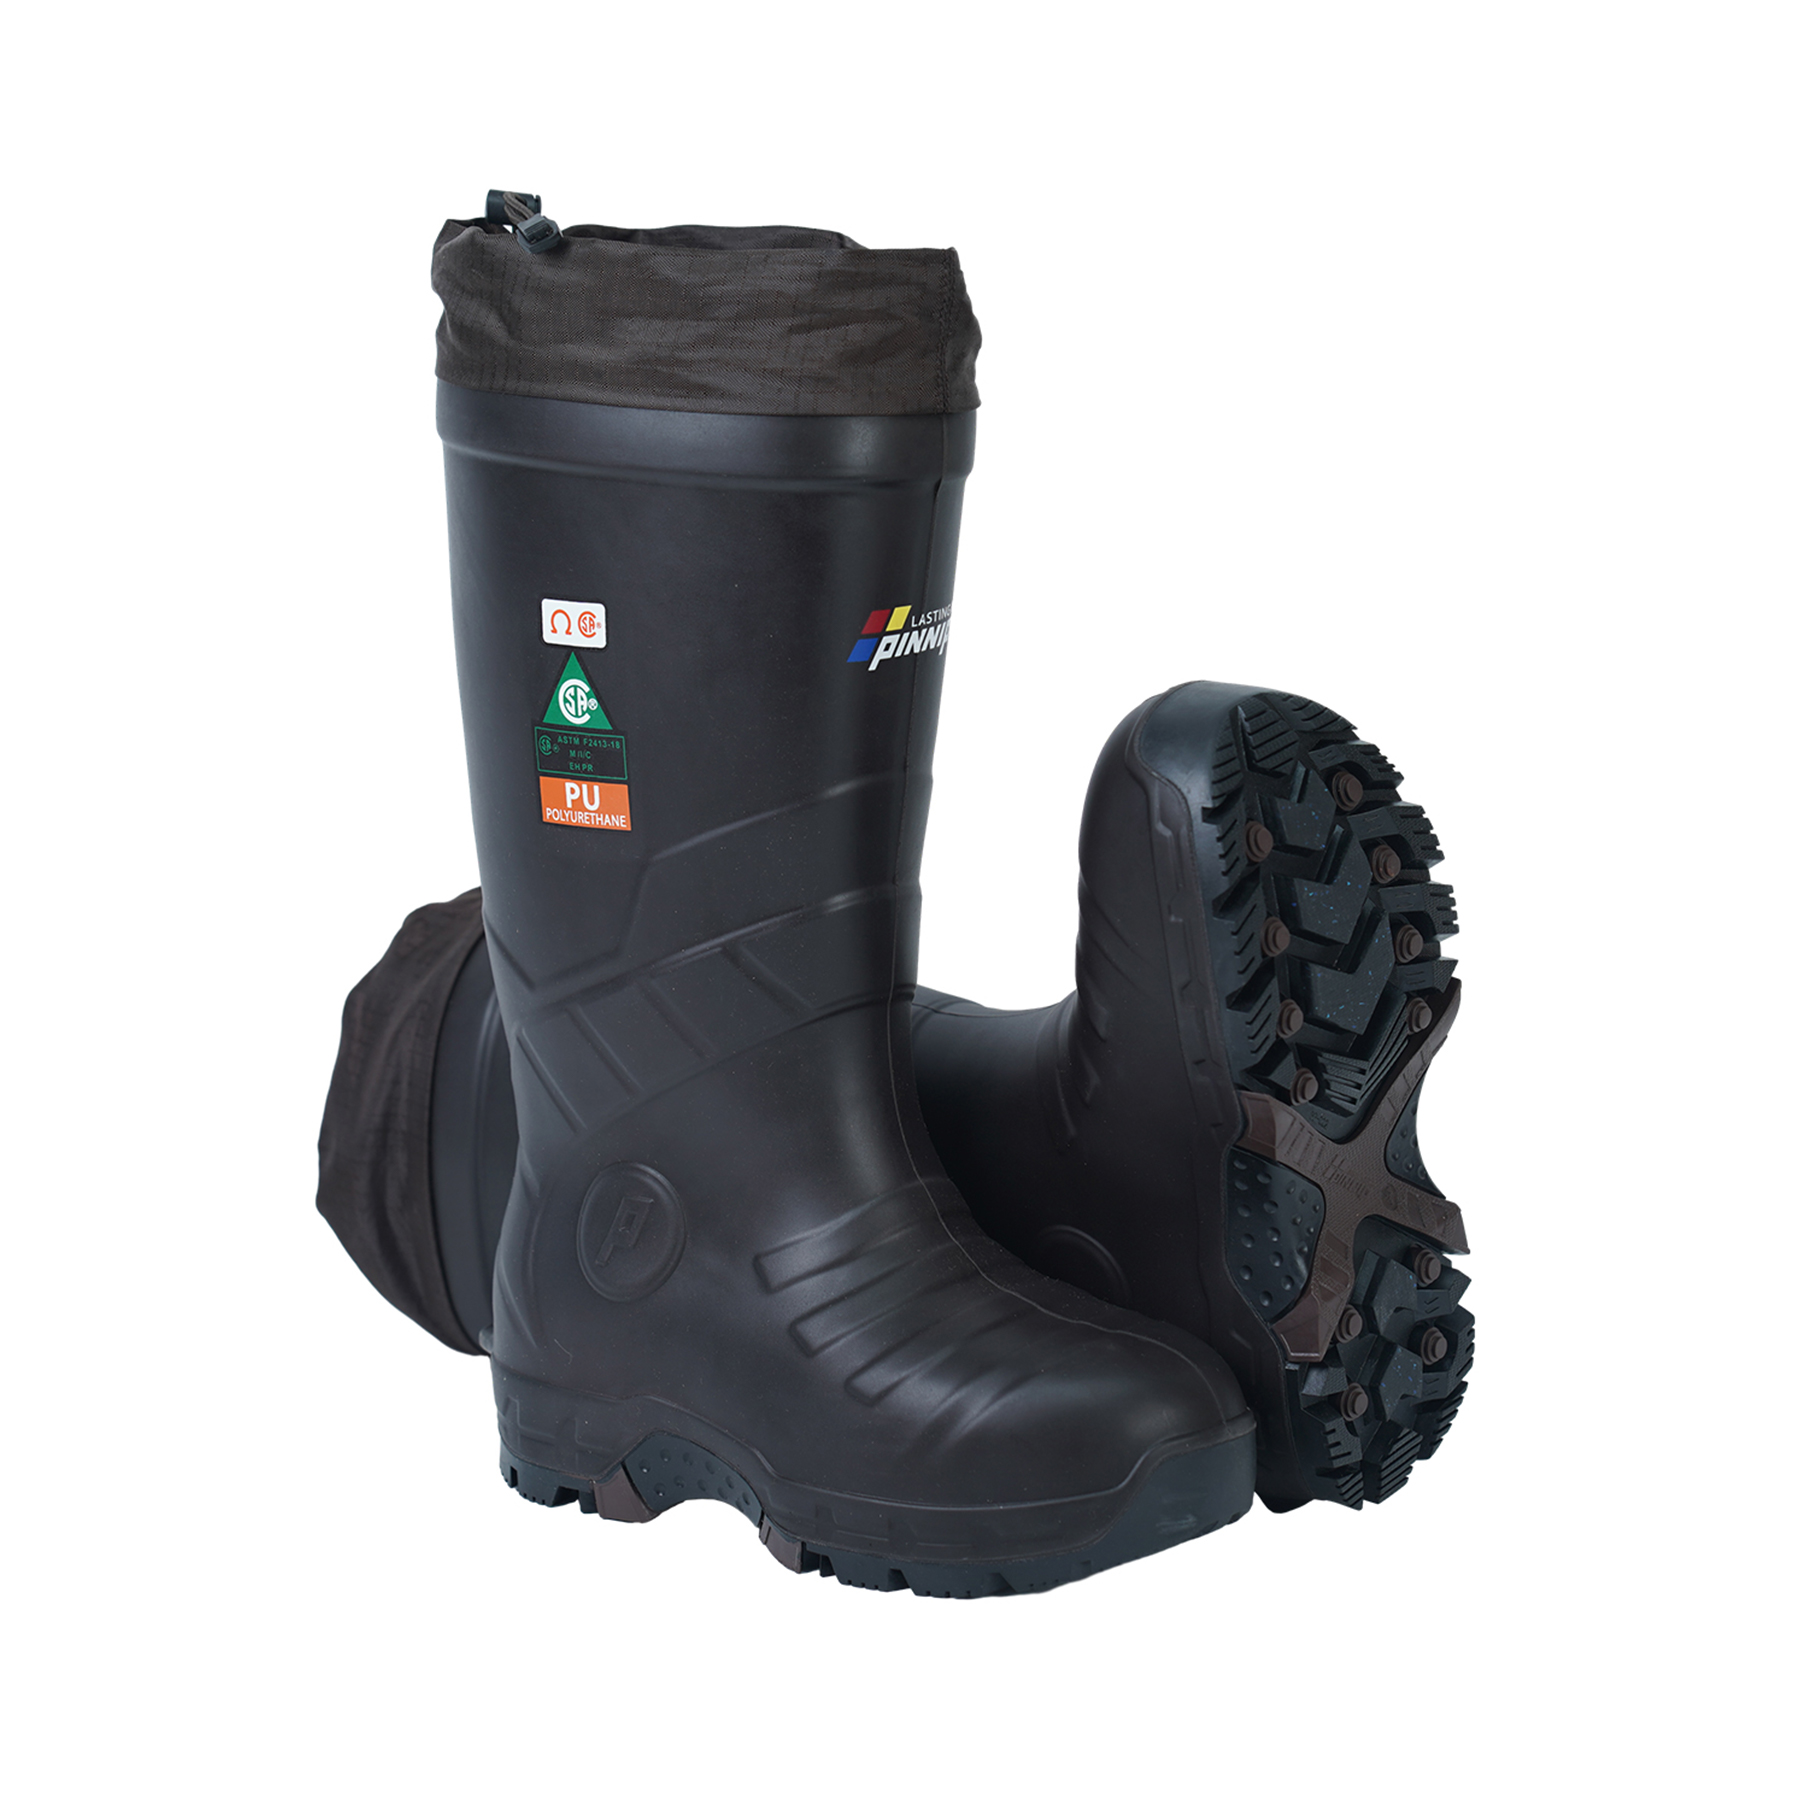 Snow Conquer protective boots-Brown, safety boots, steel toe boots, Non-slip shoes.